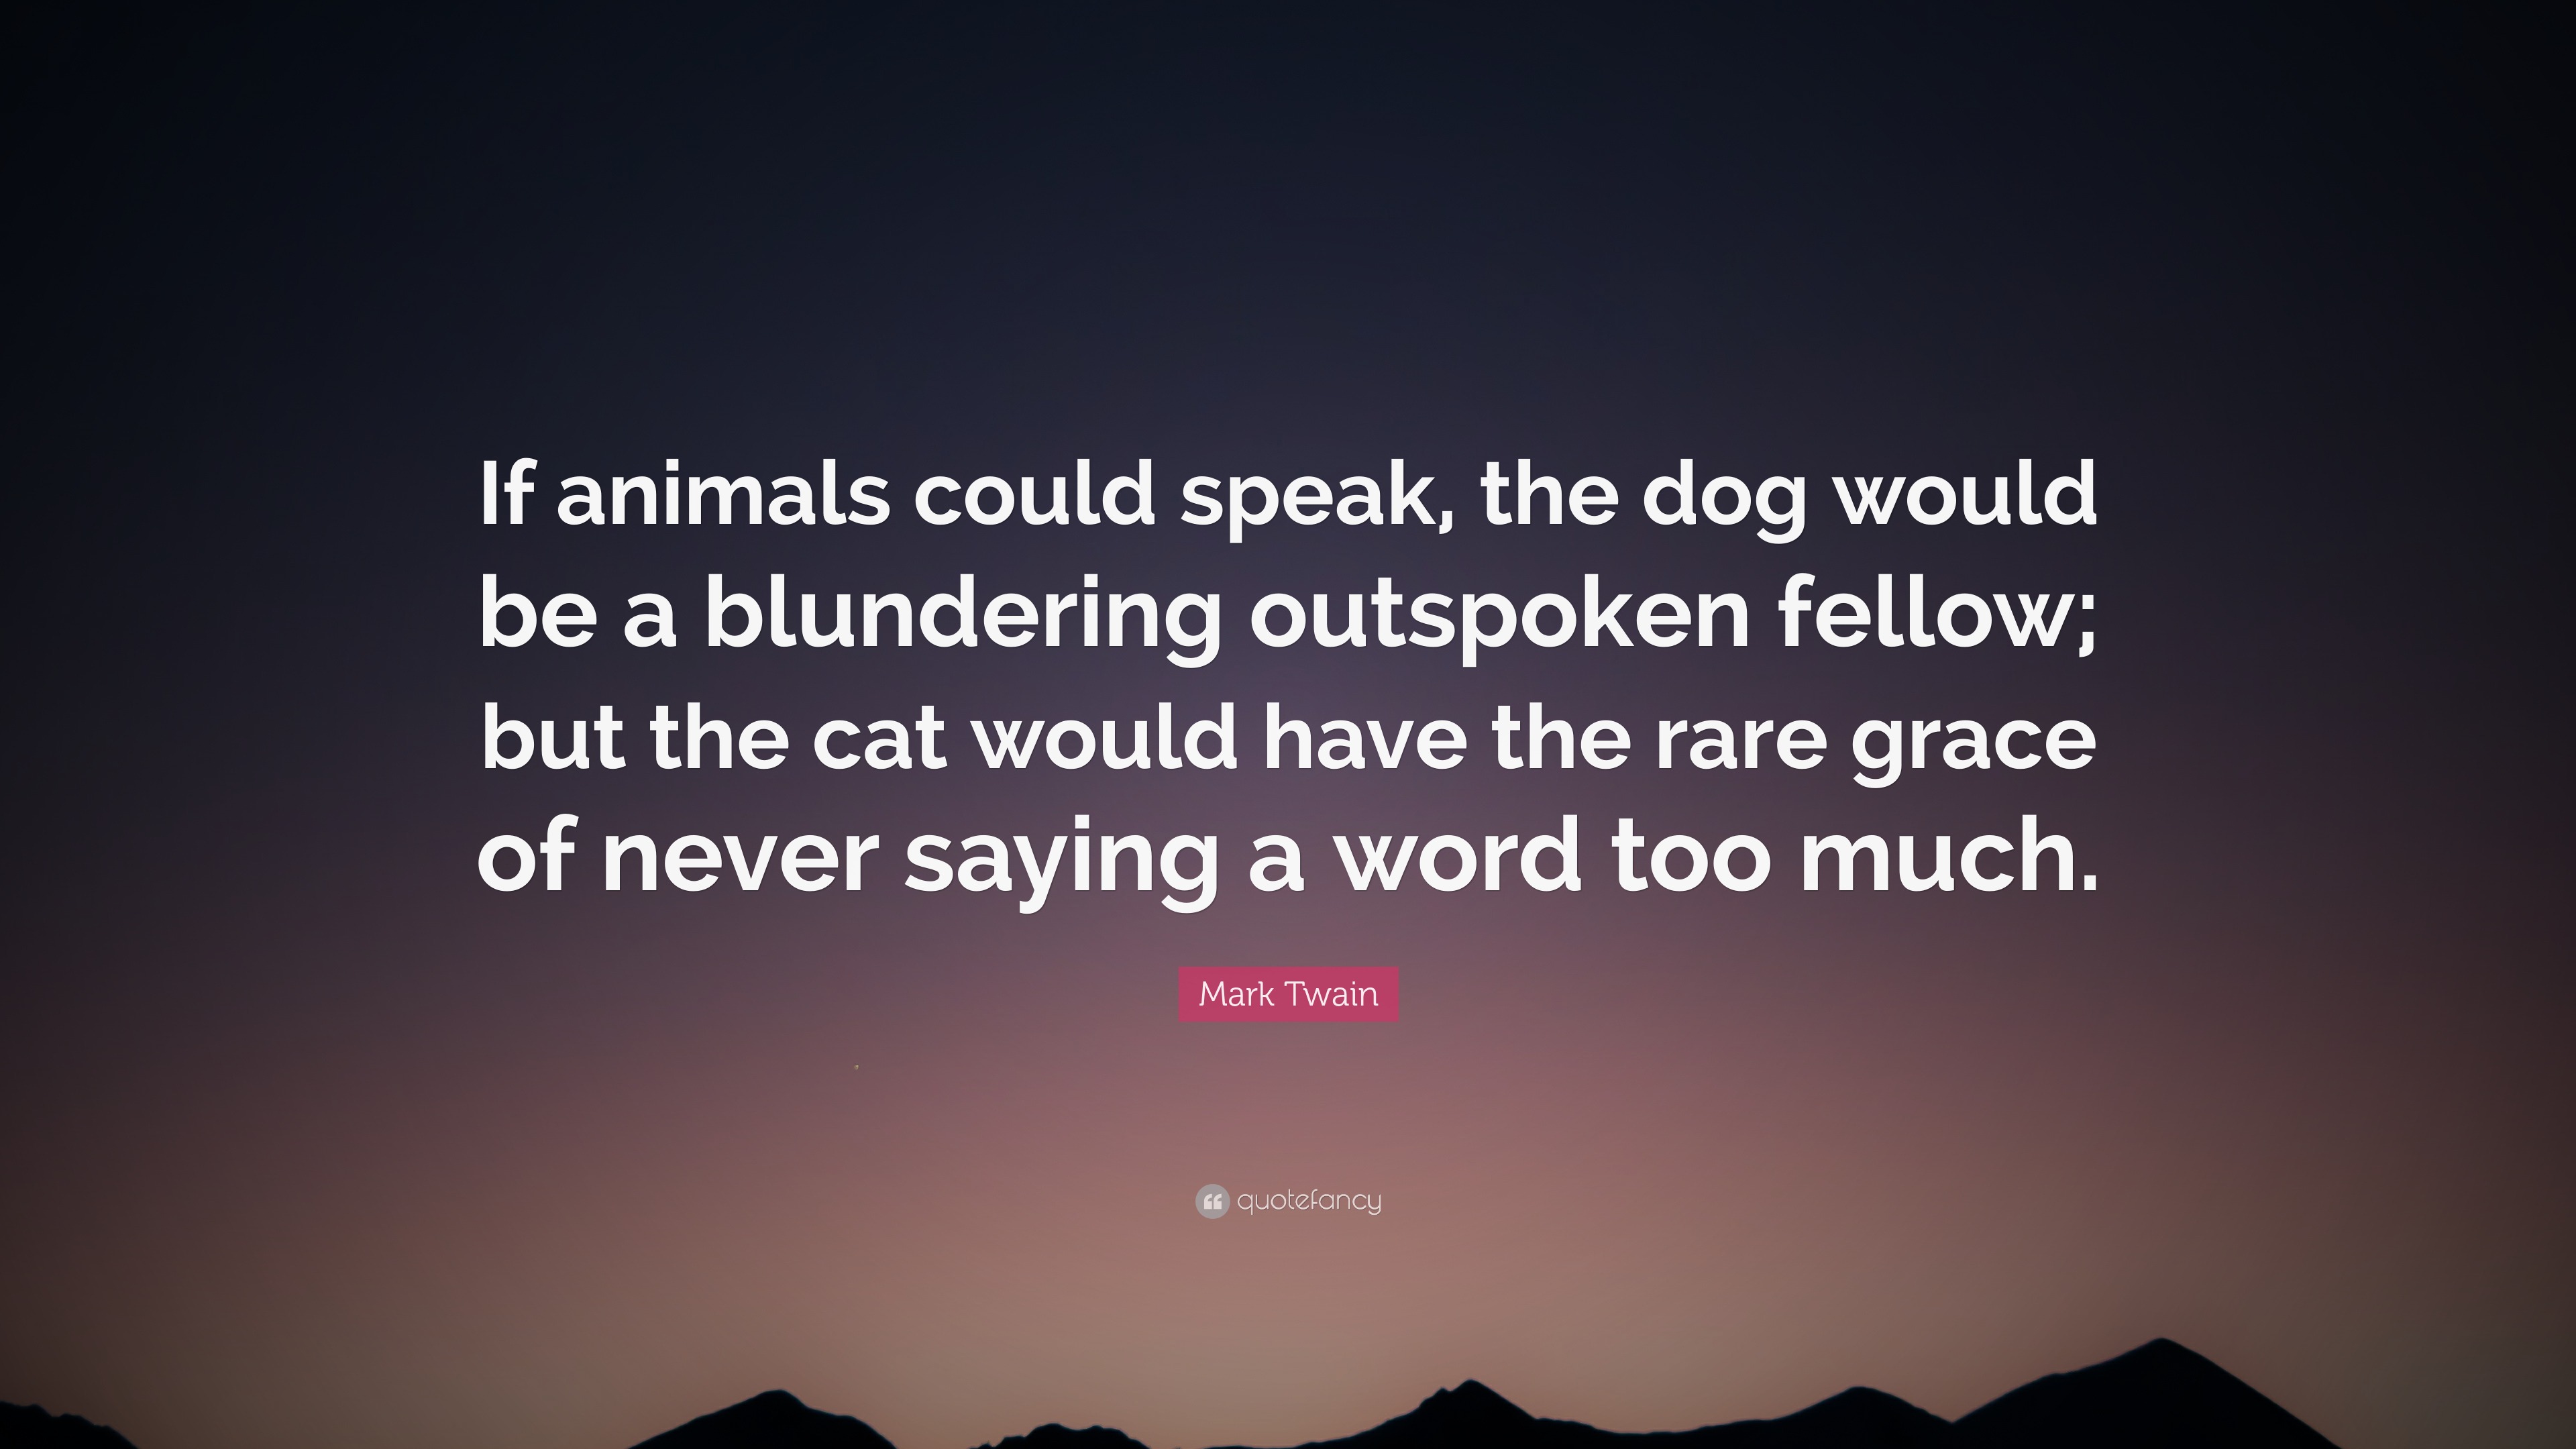 If animals could speak, the dog would be a blundering outspoken